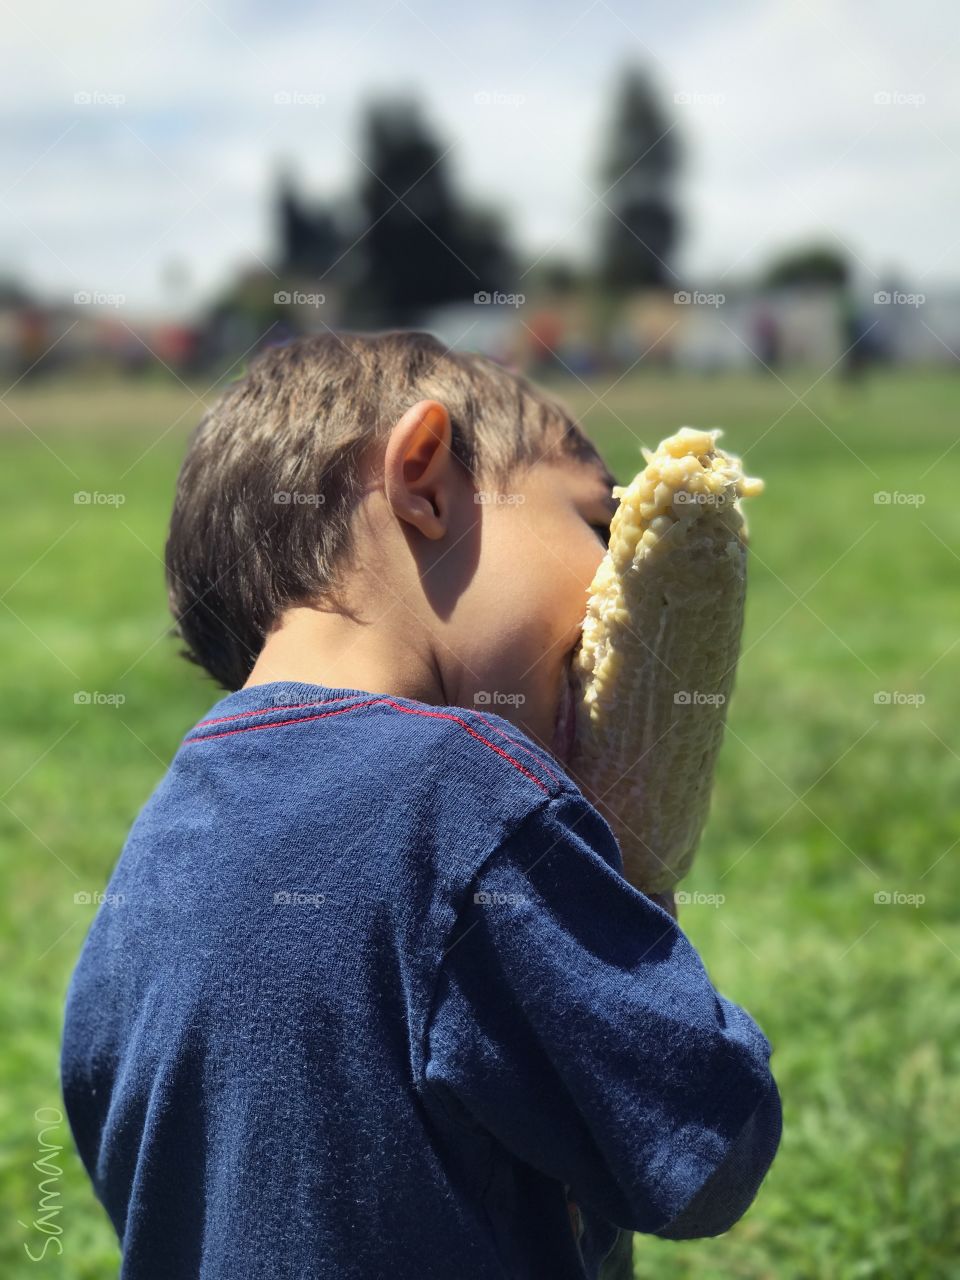 “Elote Kid” ~ Ladies and gentlemen this is how you eat corn. You enjoy it without a care in the world if you get dirty. Kids are truly the only ones who know what they want. #EloteKid